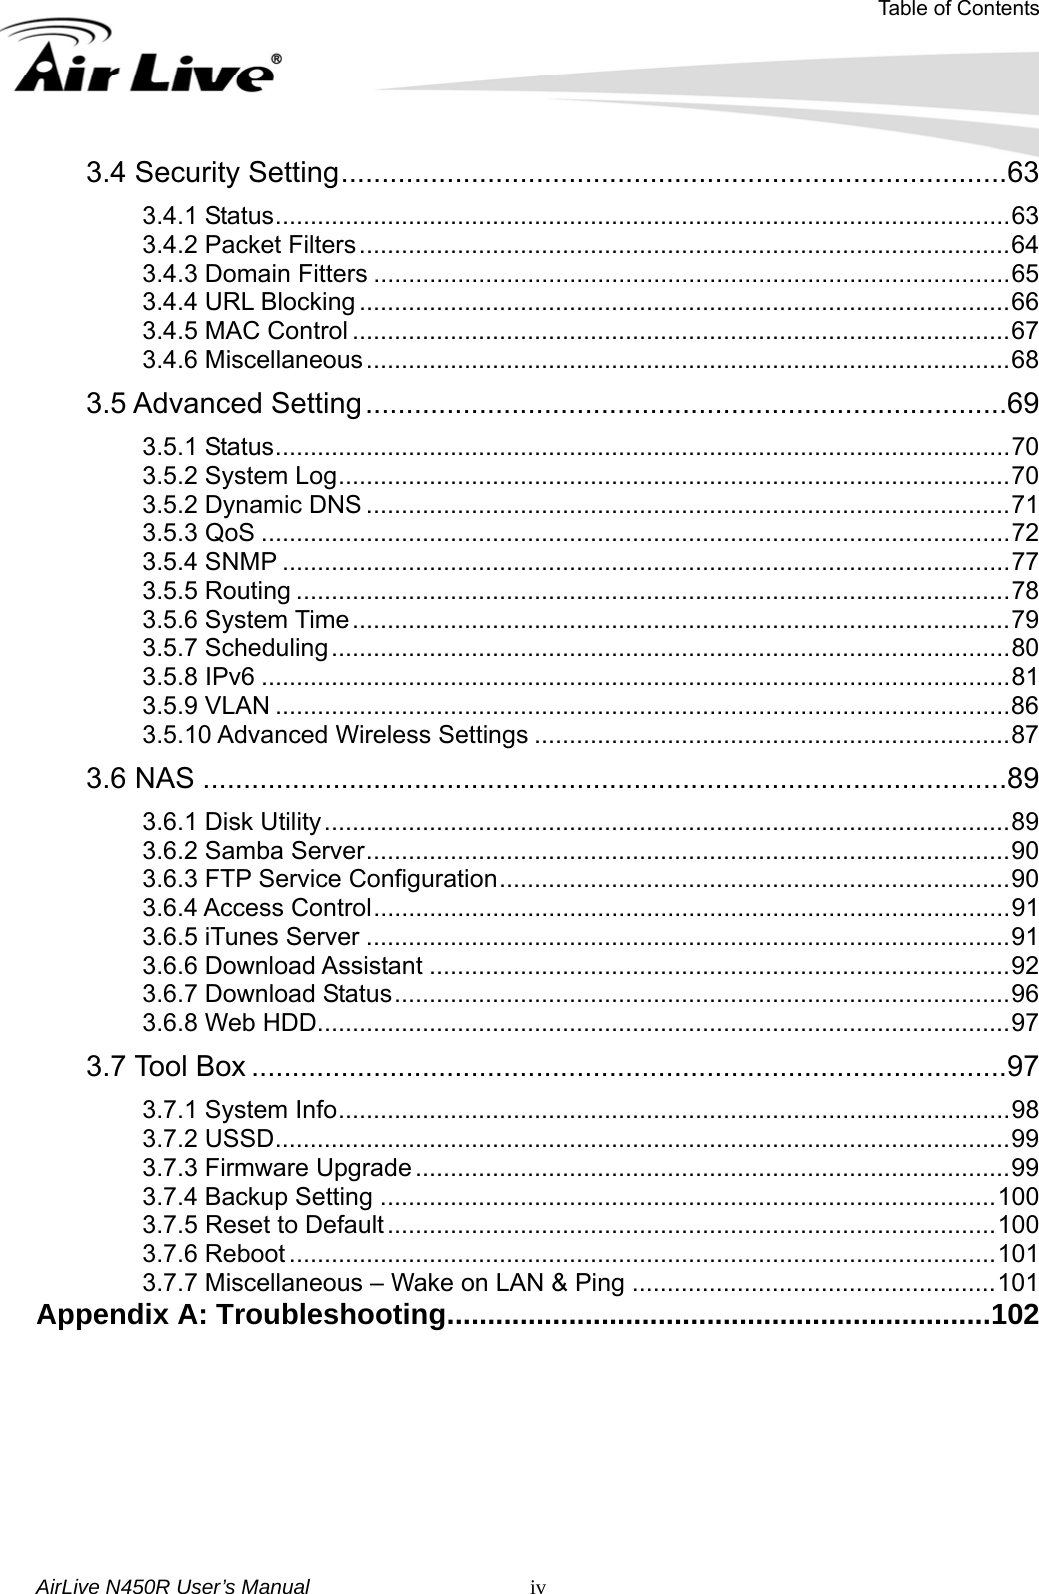 Table of Contents AirLive N450R User’s Manual   iv3.4 Security Setting..................................................................................63 3.4.1 Status.........................................................................................................63 3.4.2 Packet Filters.............................................................................................64 3.4.3 Domain Fitters ...........................................................................................65 3.4.4 URL Blocking .............................................................................................66 3.4.5 MAC Control ..............................................................................................67 3.4.6 Miscellaneous............................................................................................68 3.5 Advanced Setting...............................................................................69 3.5.1 Status.........................................................................................................70 3.5.2 System Log................................................................................................70 3.5.2 Dynamic DNS ............................................................................................71 3.5.3 QoS ...........................................................................................................72 3.5.4 SNMP ........................................................................................................77 3.5.5 Routing ......................................................................................................78 3.5.6 System Time..............................................................................................79 3.5.7 Scheduling.................................................................................................80 3.5.8 IPv6 ...........................................................................................................81 3.5.9 VLAN .........................................................................................................86 3.5.10 Advanced Wireless Settings ....................................................................87 3.6 NAS ...................................................................................................89 3.6.1 Disk Utility..................................................................................................89 3.6.2 Samba Server............................................................................................90 3.6.3 FTP Service Configuration.........................................................................90 3.6.4 Access Control...........................................................................................91 3.6.5 iTunes Server ............................................................................................91 3.6.6 Download Assistant ...................................................................................92 3.6.7 Download Status........................................................................................96 3.6.8 Web HDD...................................................................................................97 3.7 Tool Box .............................................................................................97 3.7.1 System Info................................................................................................98 3.7.2 USSD.........................................................................................................99 3.7.3 Firmware Upgrade .....................................................................................99 3.7.4 Backup Setting ........................................................................................100 3.7.5 Reset to Default.......................................................................................100 3.7.6 Reboot .....................................................................................................101 3.7.7 Miscellaneous – Wake on LAN &amp; Ping ....................................................101 Appendix A: Troubleshooting...................................................................102 